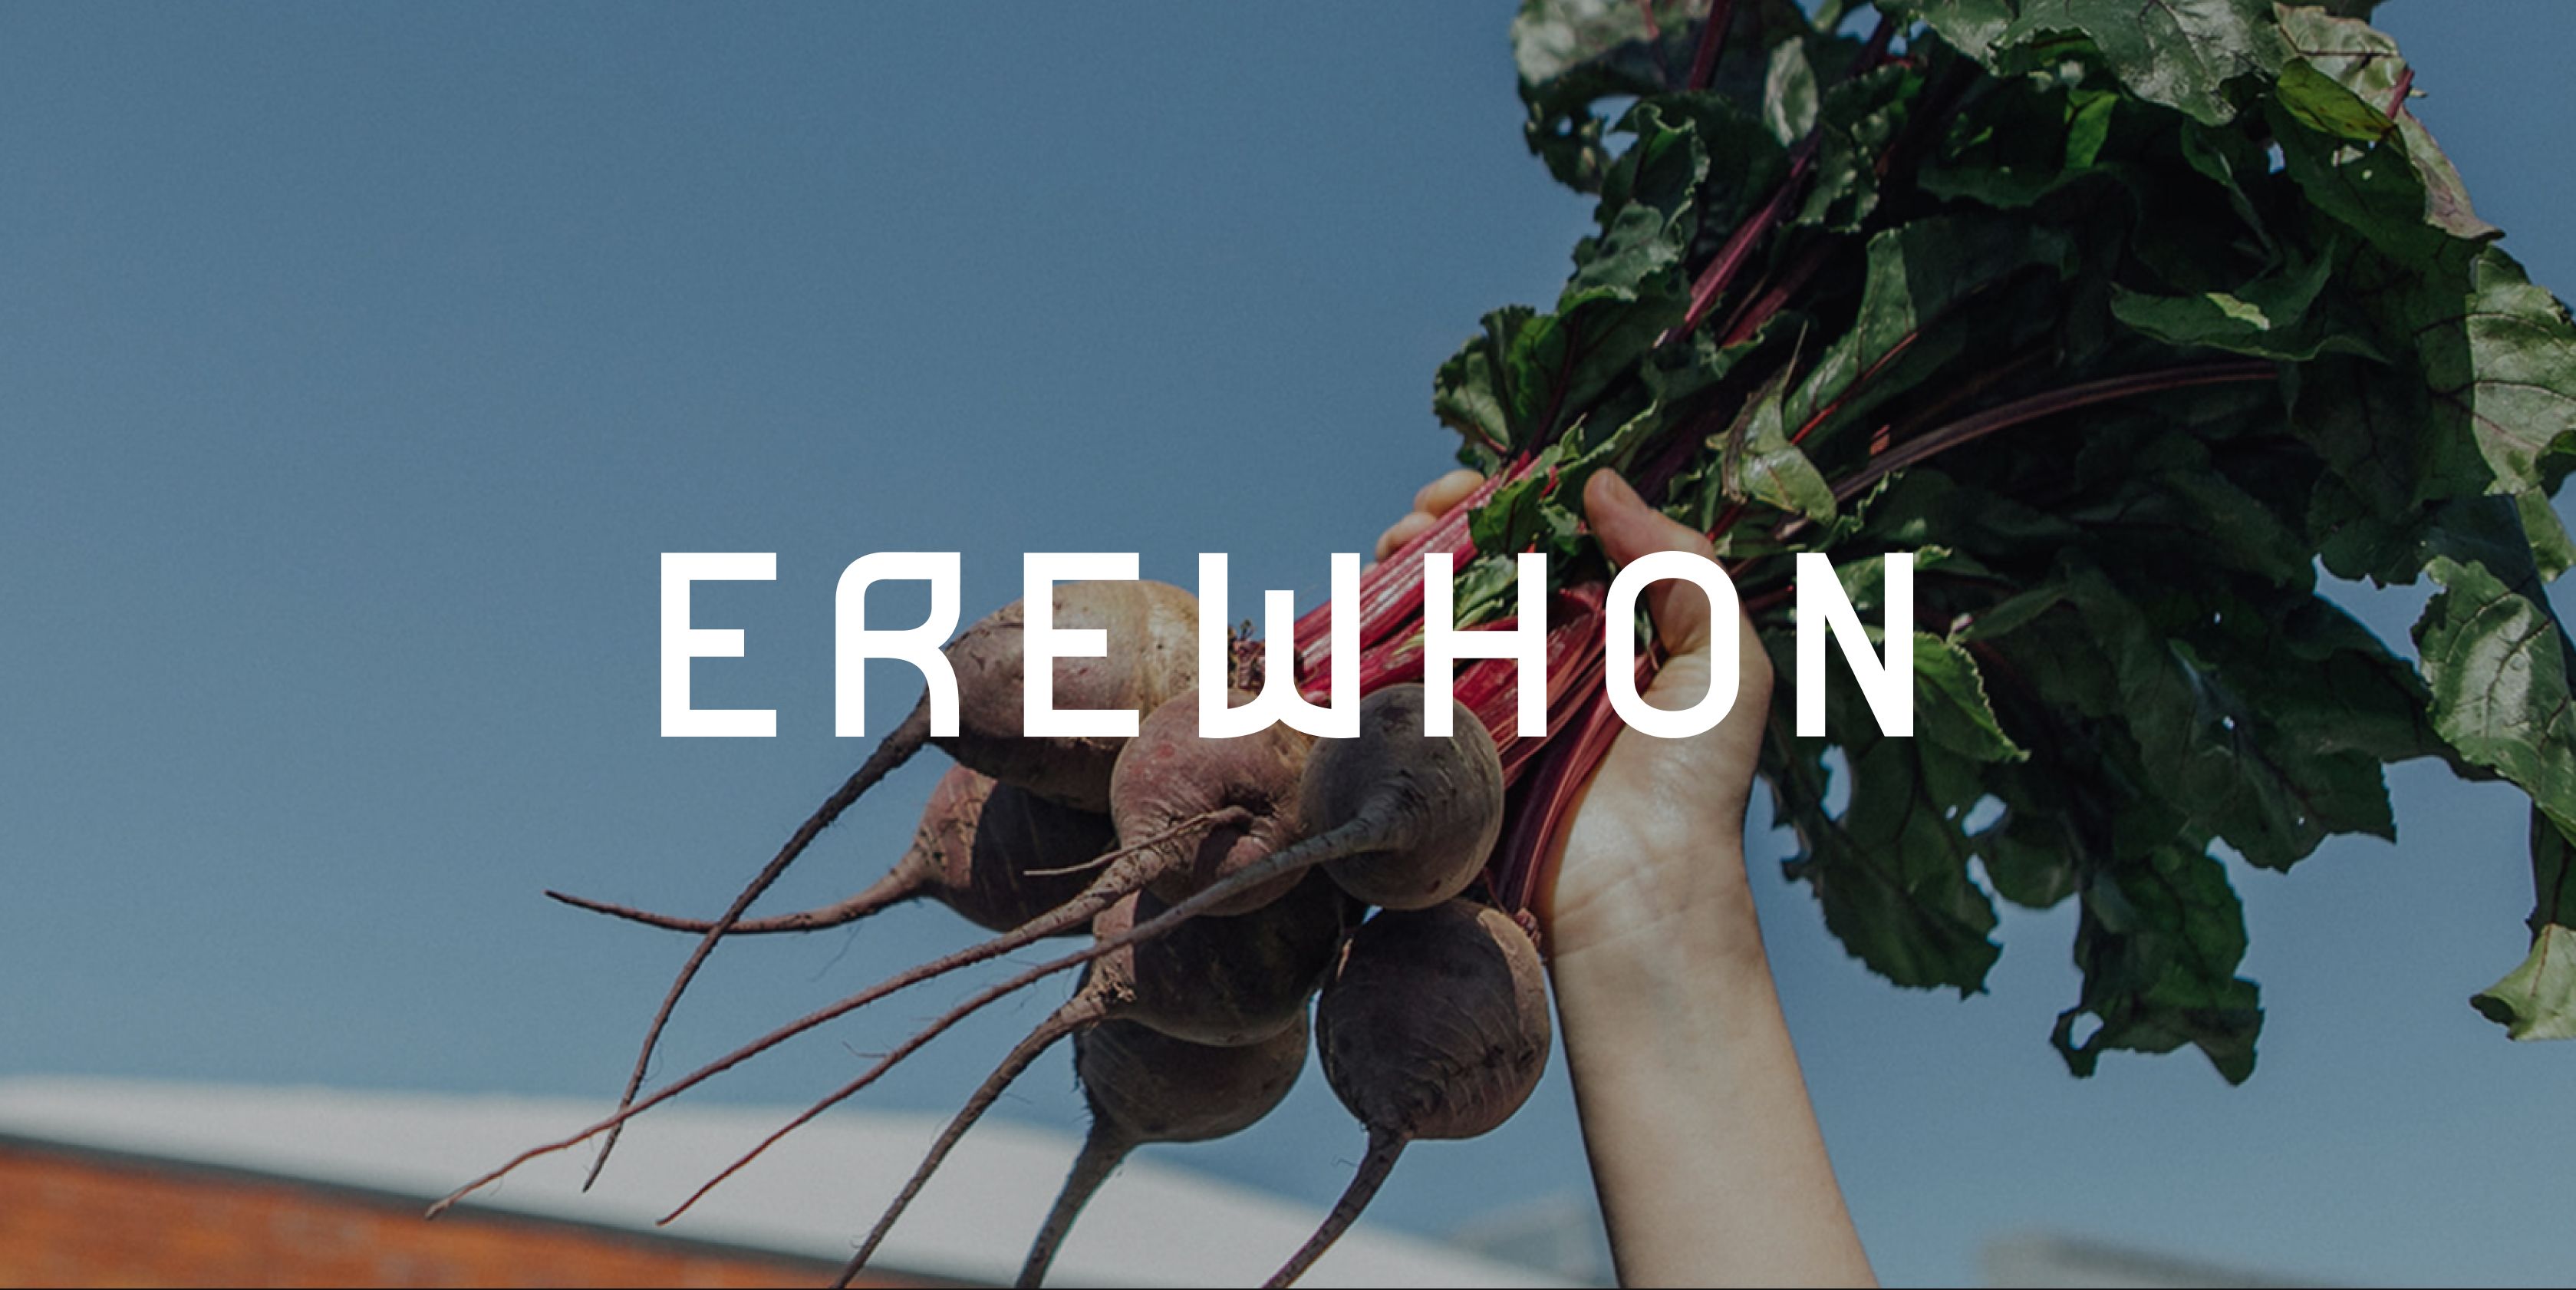 Erewhon logo overlayed on a hand holding a bunch of beets